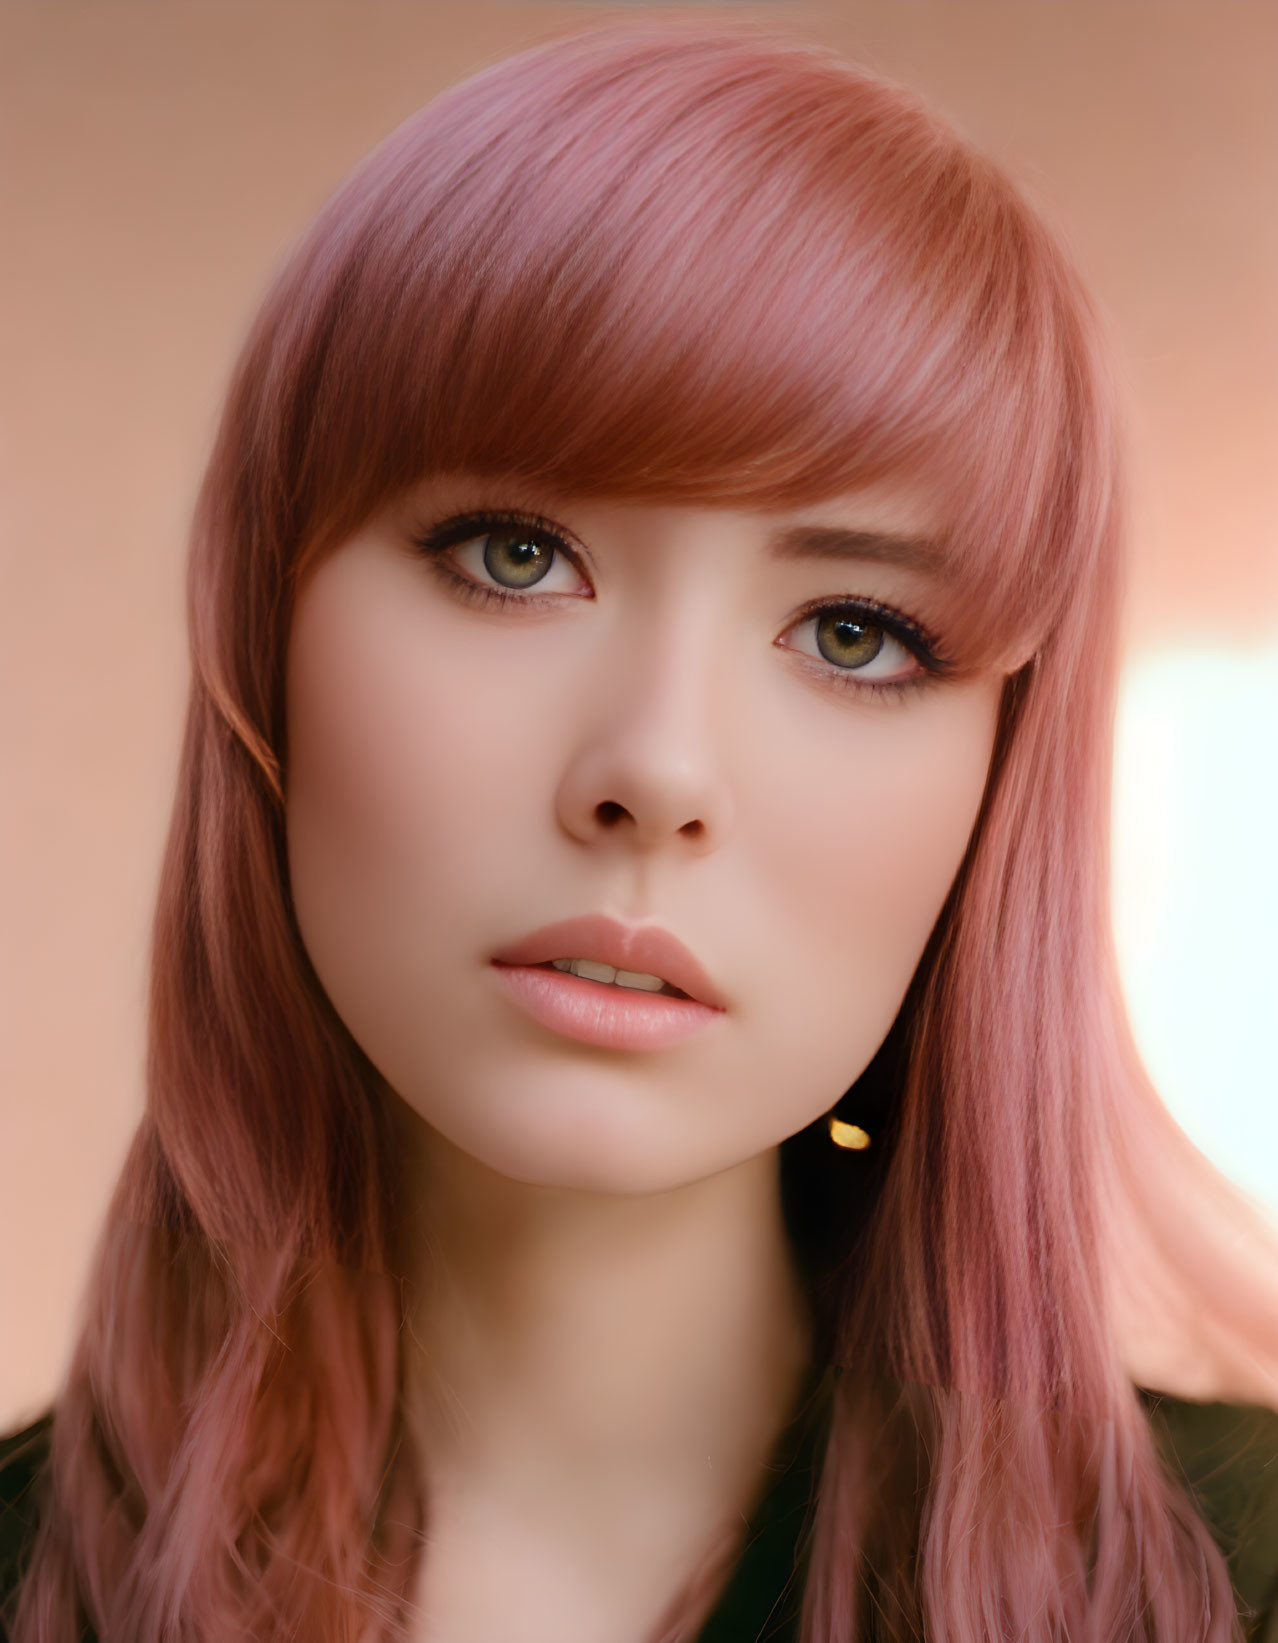 Rosy-Pink Haired Person Portrait with Golden-Brown Eyes